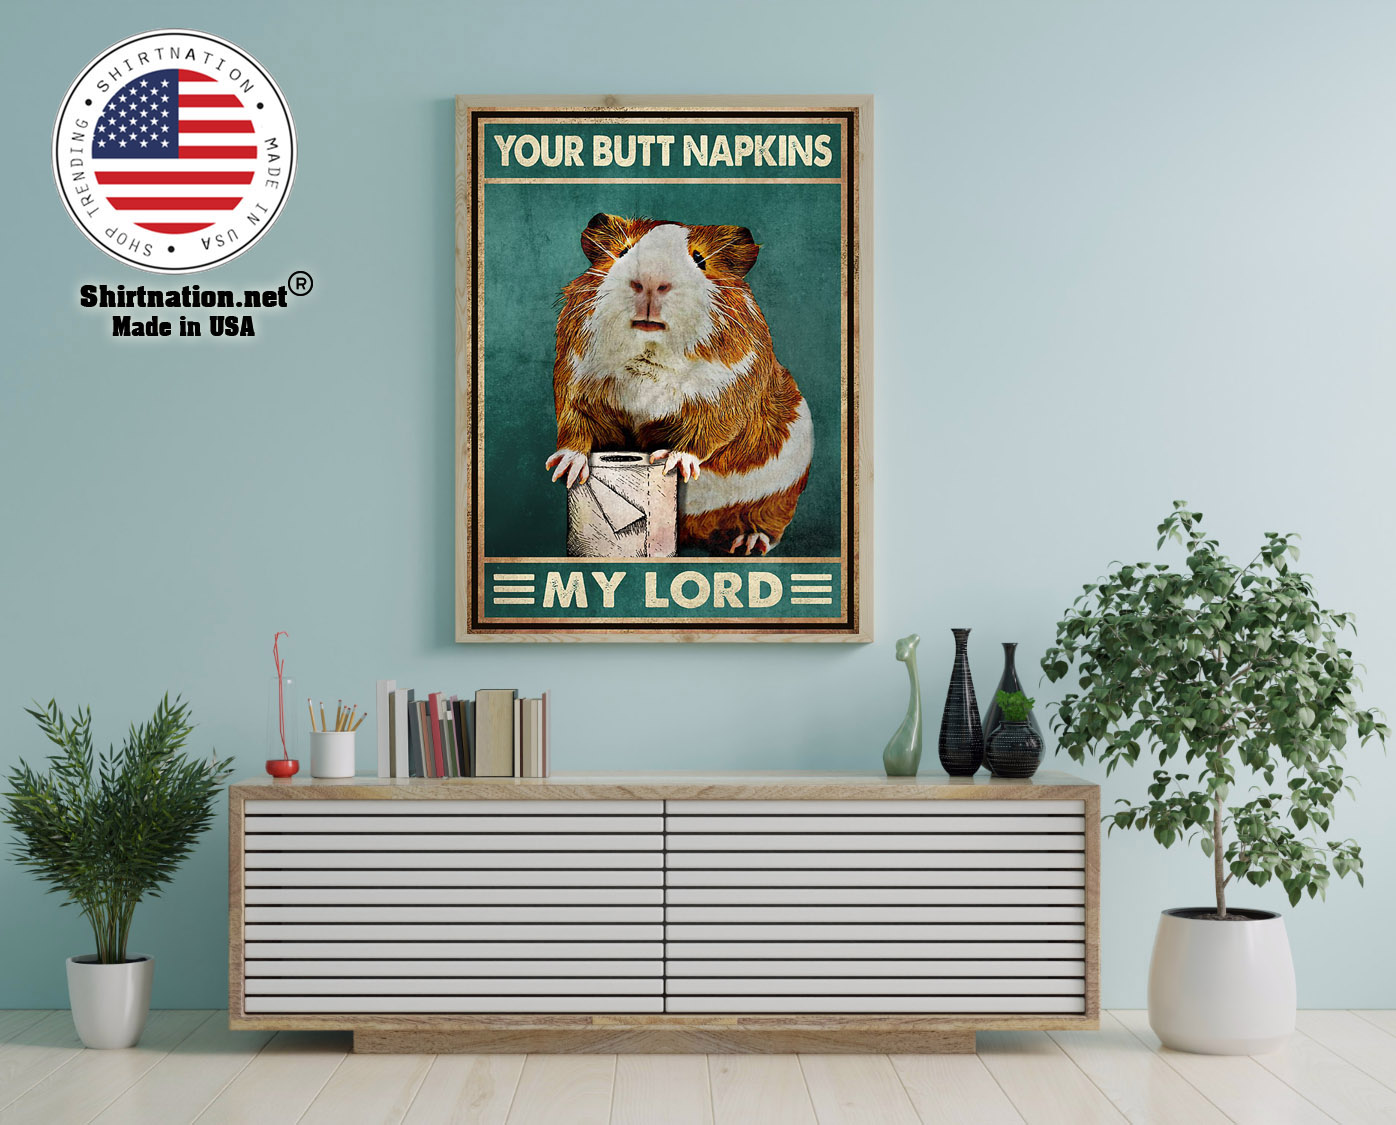 Mouse Guinea pig Your butt napkins my lord poster 12